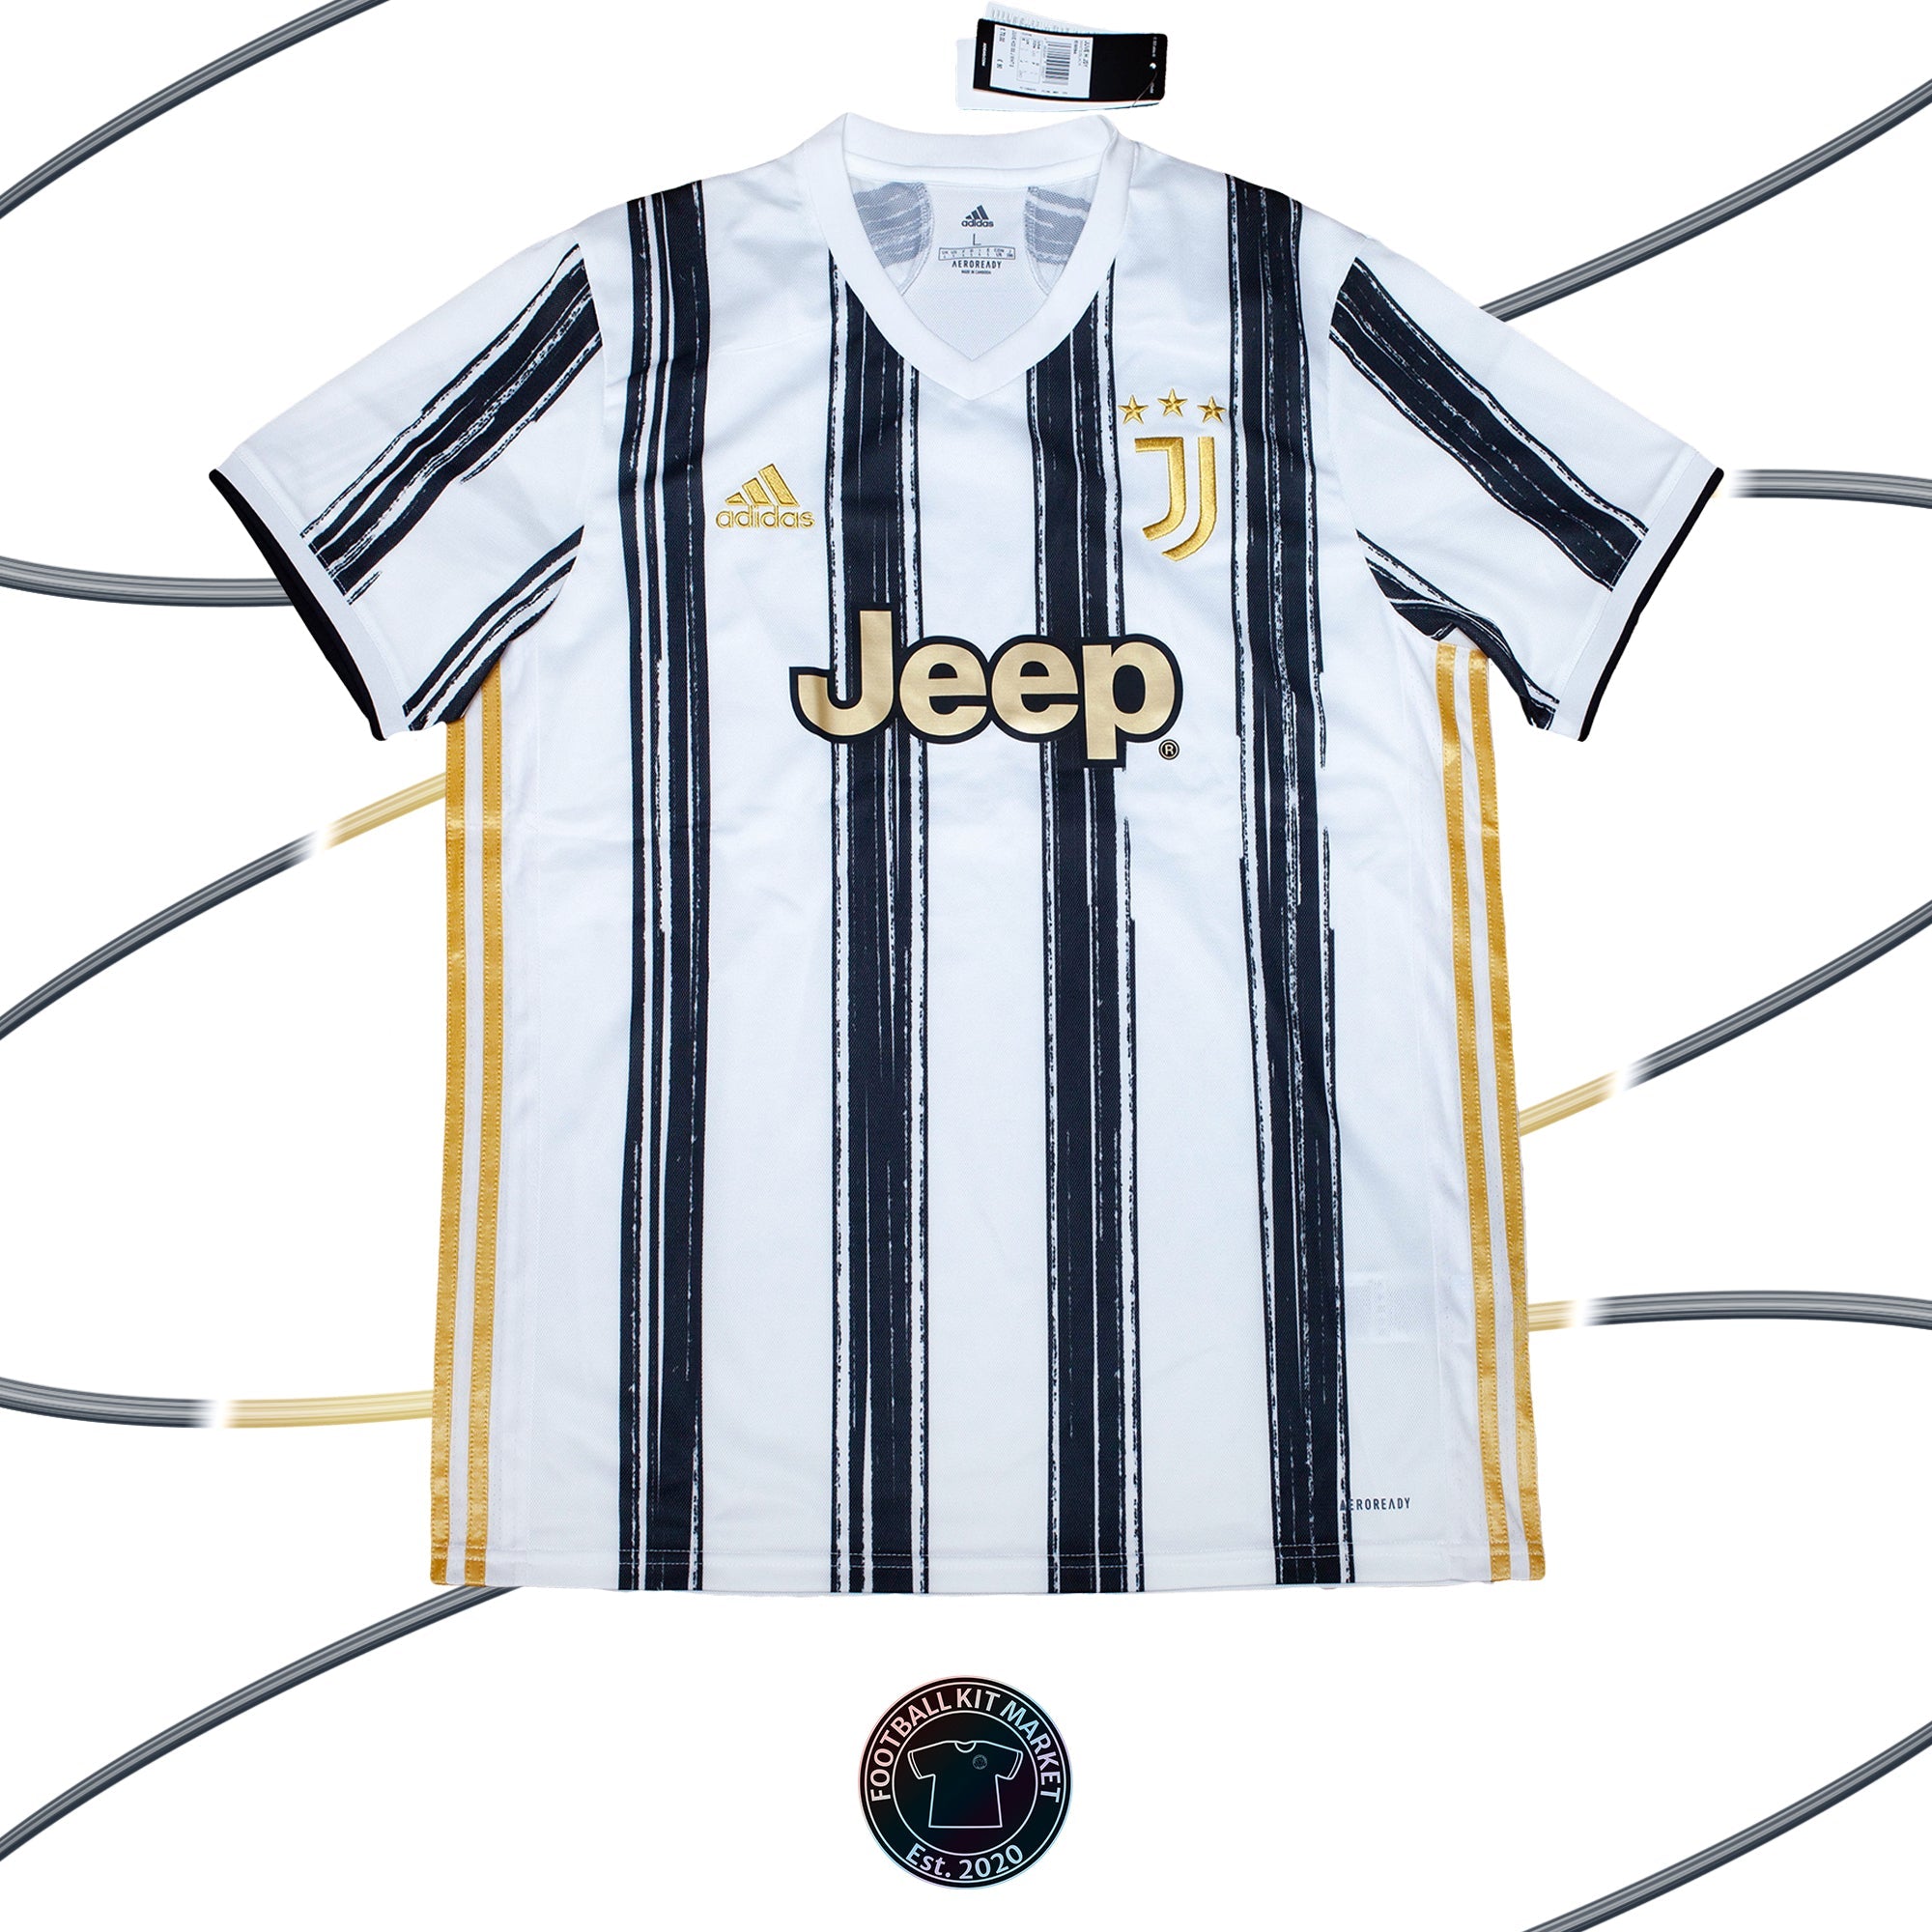 Genuine JUVENTUS Home Shirt (2020-2021) - ADIDAS (L) - Product Image from Football Kit Market